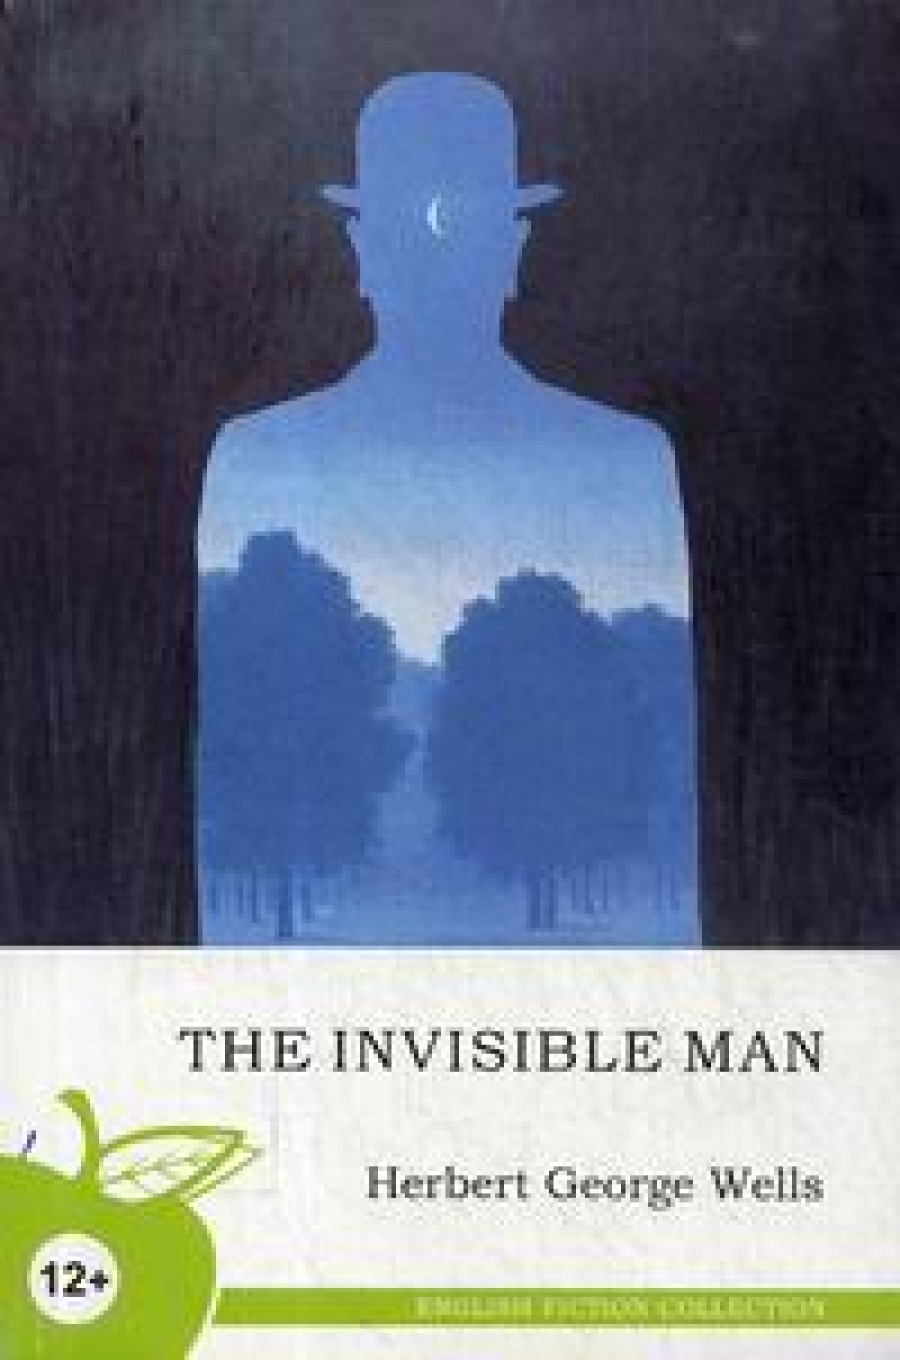 Wells H.G. The Invisible Man 